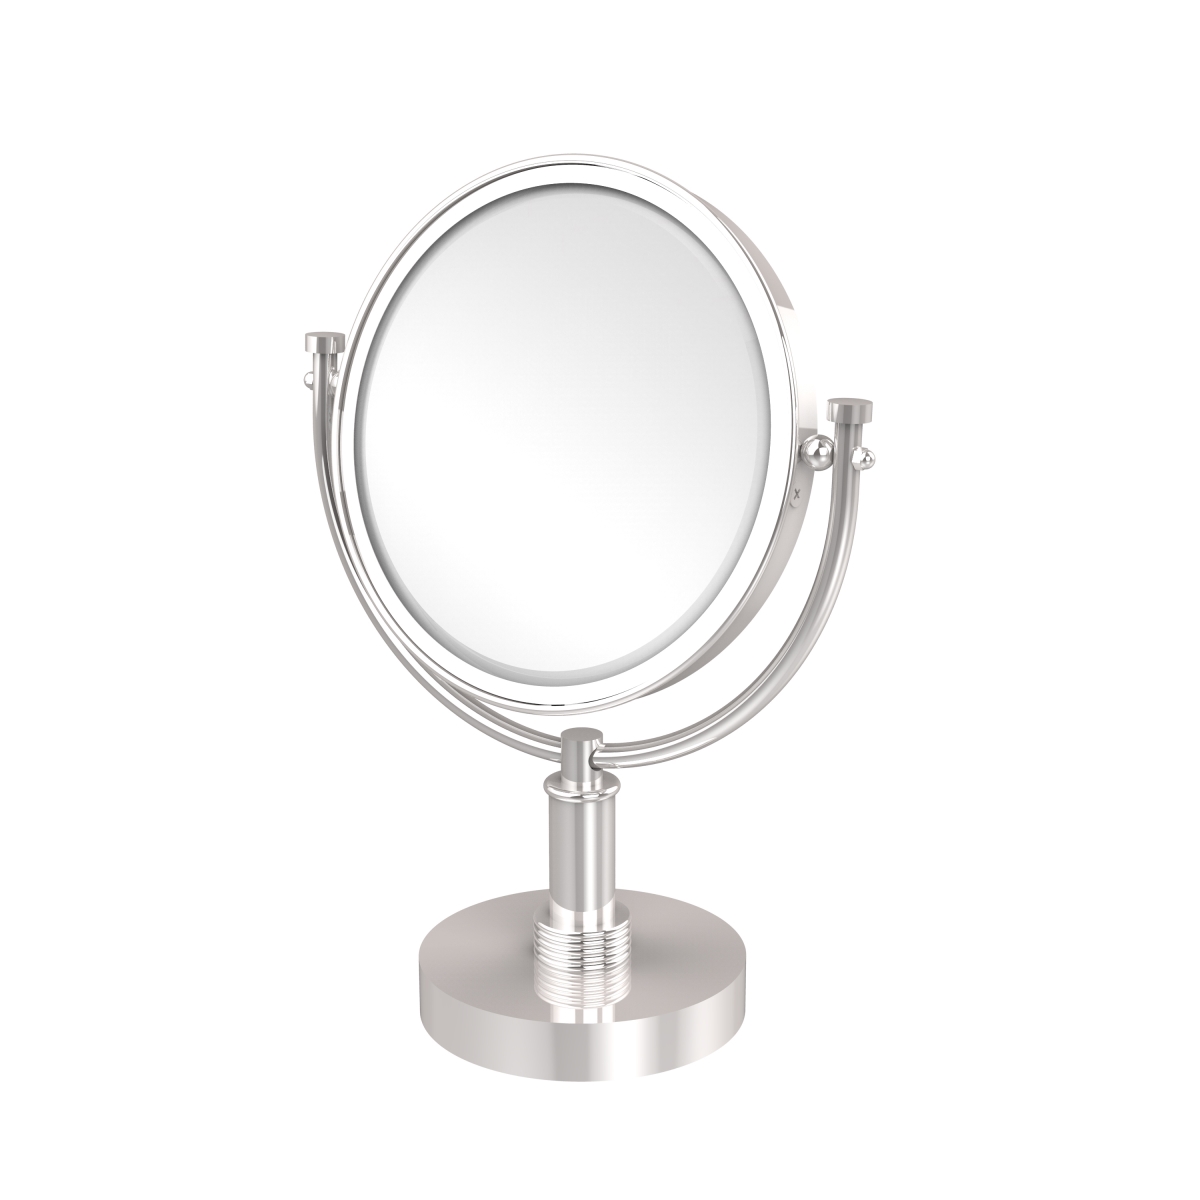 Picture of Allied Brass DM-4G-2X-PC 8 in. Vanity Top Make-Up Mirror 2X Magnification, Polished Chrome - 15 x 8 x 8 in.